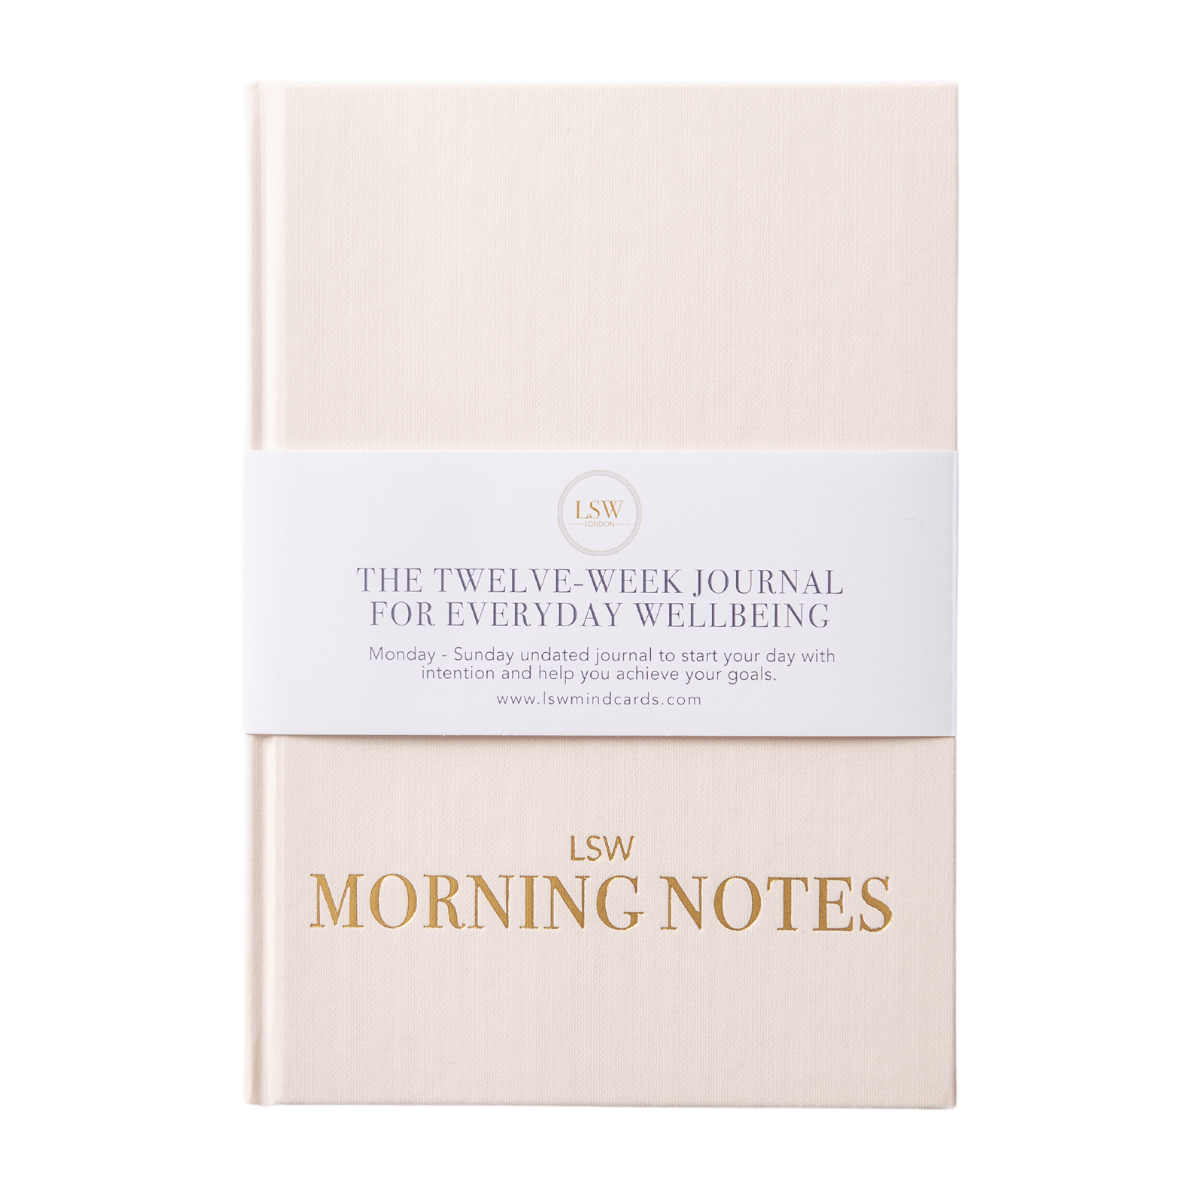 Morning Notes - Daily wellbeing journal LSW